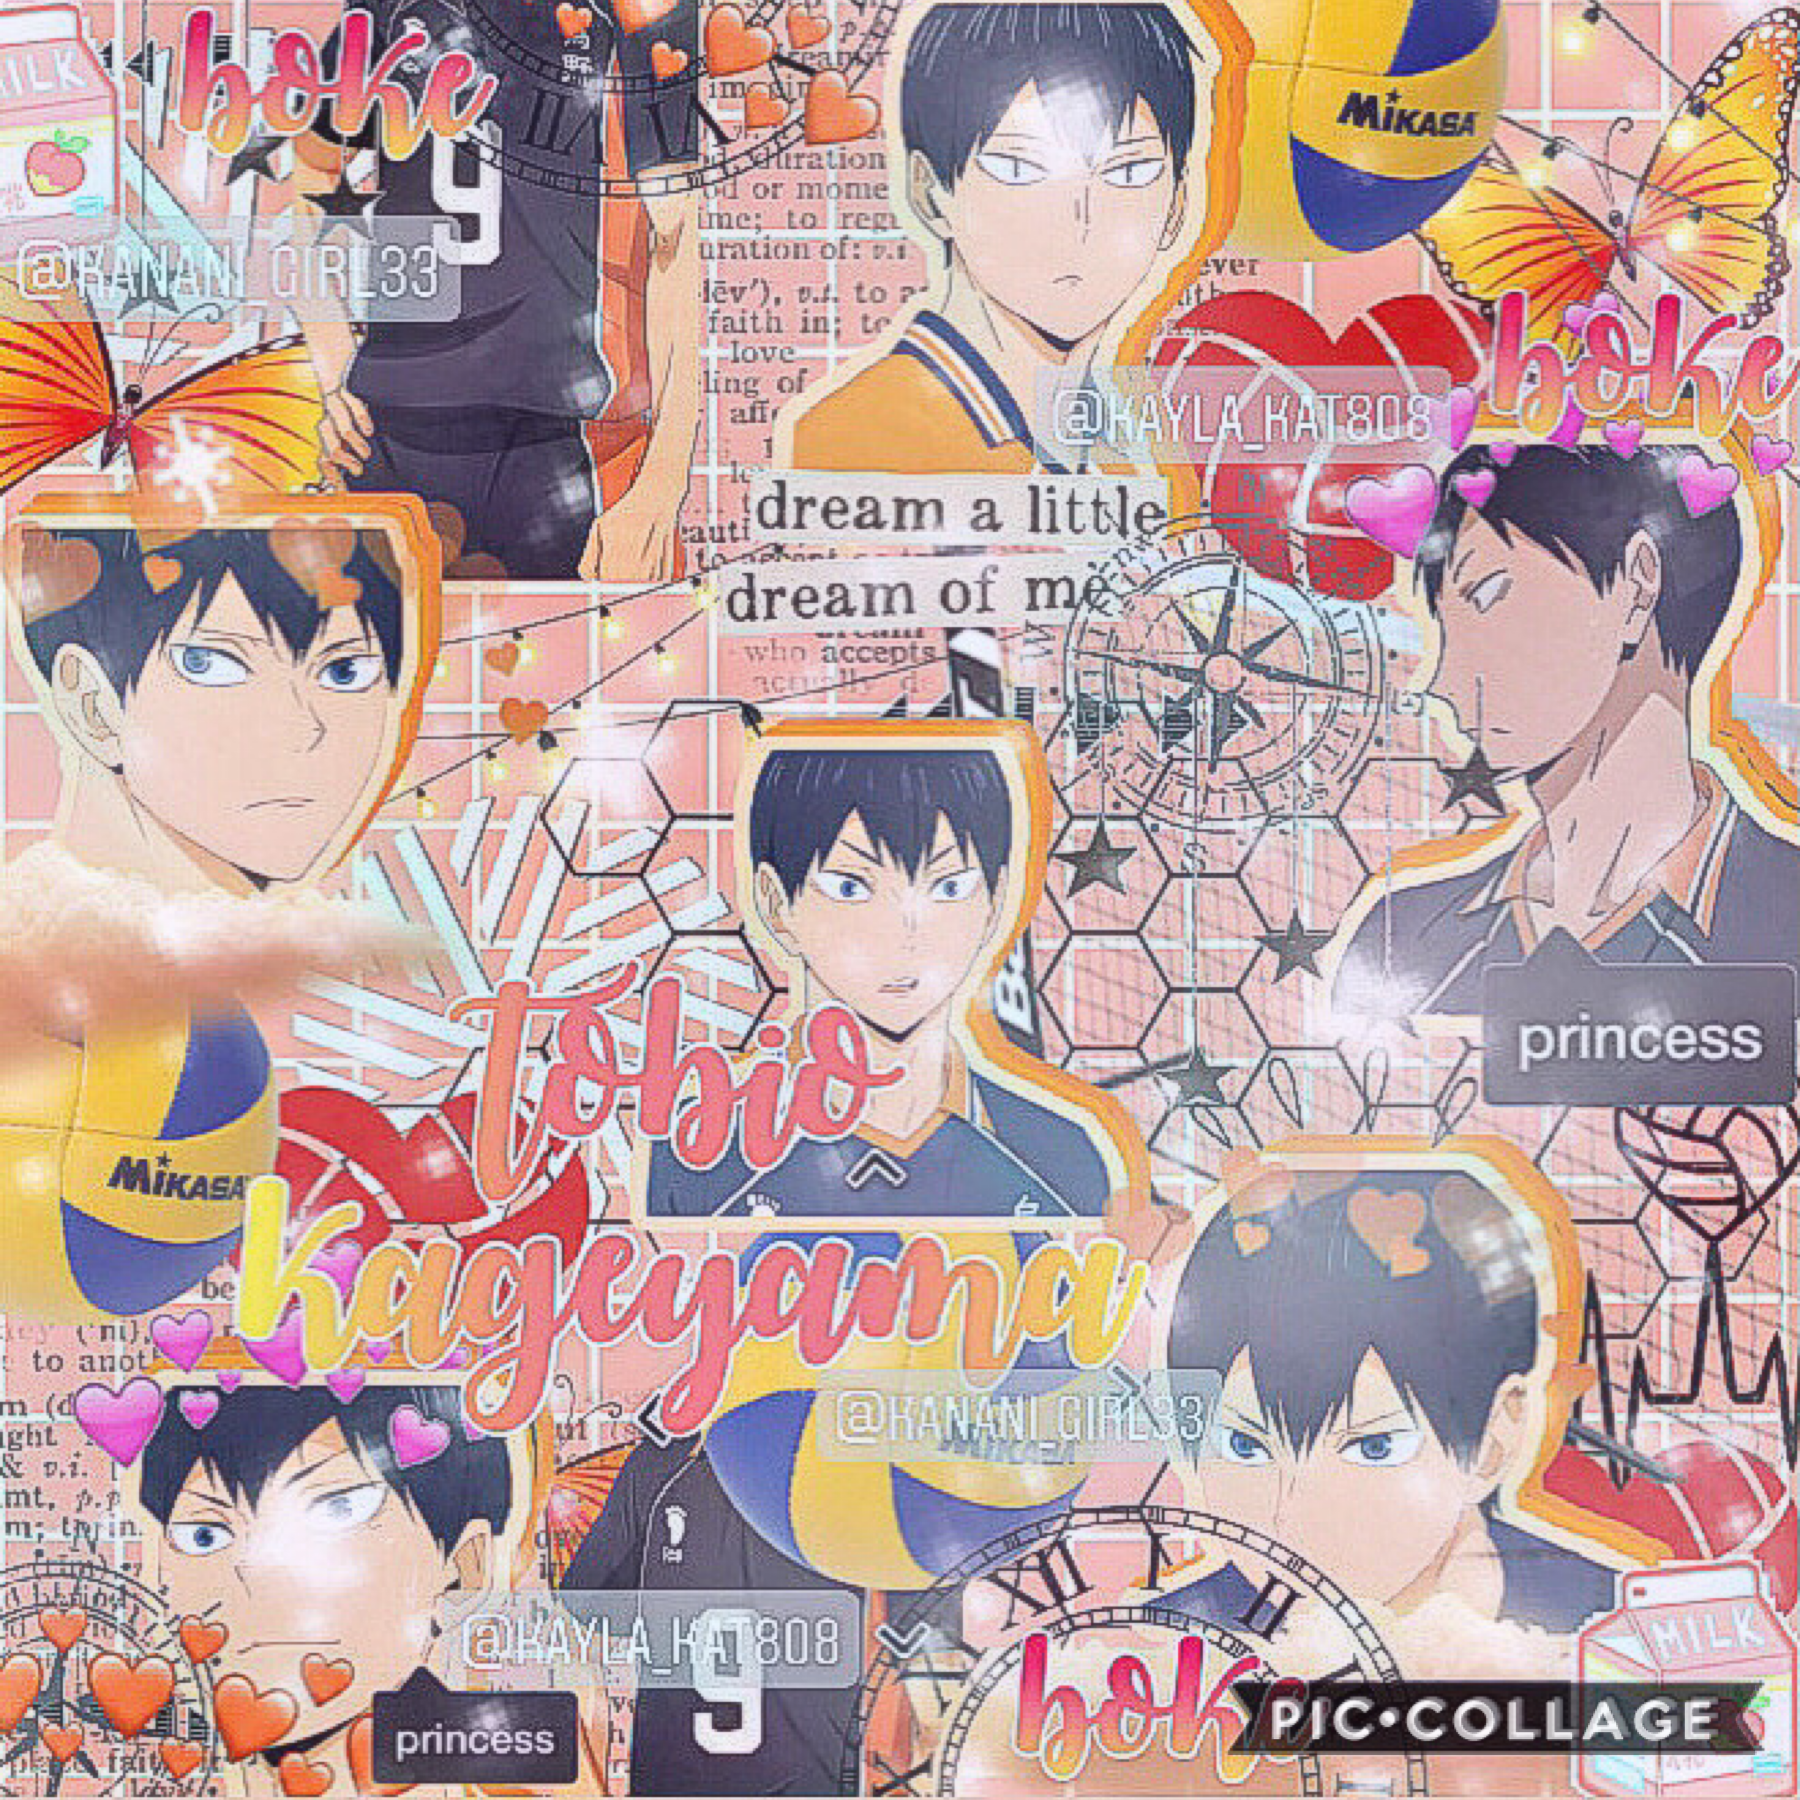 🤍tap🤍
december 6, 2020
new style!! what do y’all think? alright so i finally started watching anime (specifically haikyu! please don’t spoil it for me) im def in love with kageyama like seriously. he’s soo perfect ♥️ qotd: who’s your favorite character (i